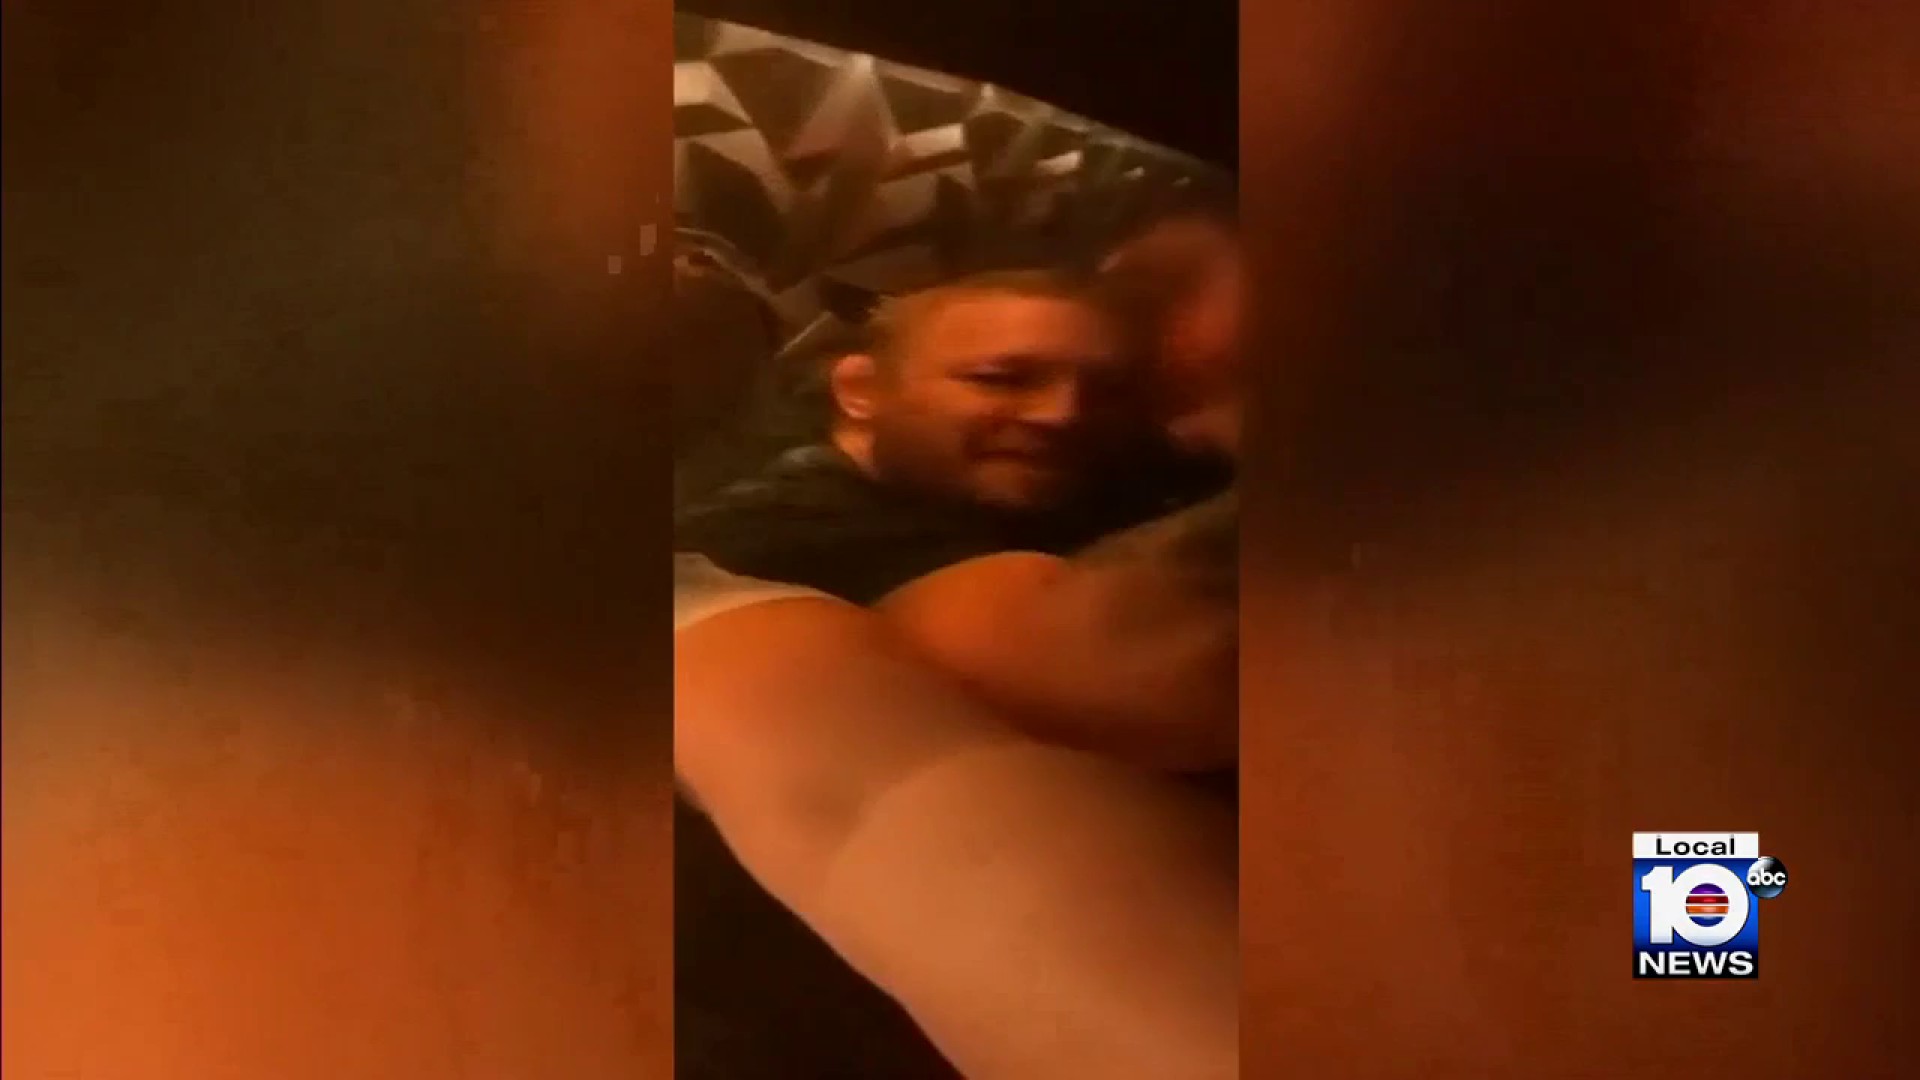 Granny Rape Xxx - More video surfaces of Conor McGregor with woman who alleges rape